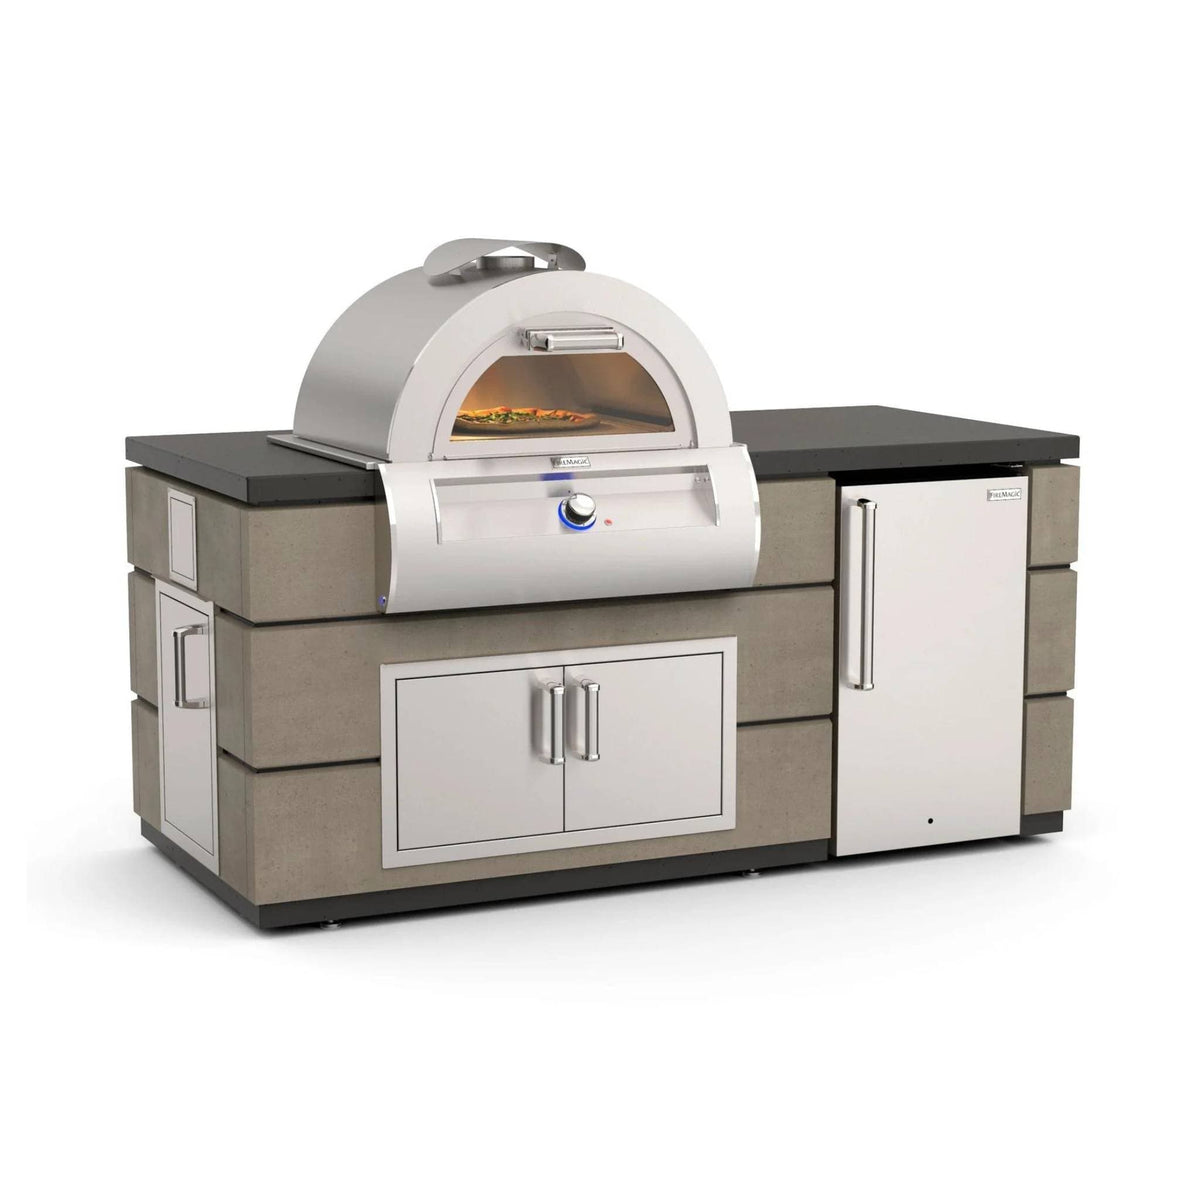 Fire Magic Contemporary Pre-Fab Pizza Oven Island with Refrigerator Cut-out